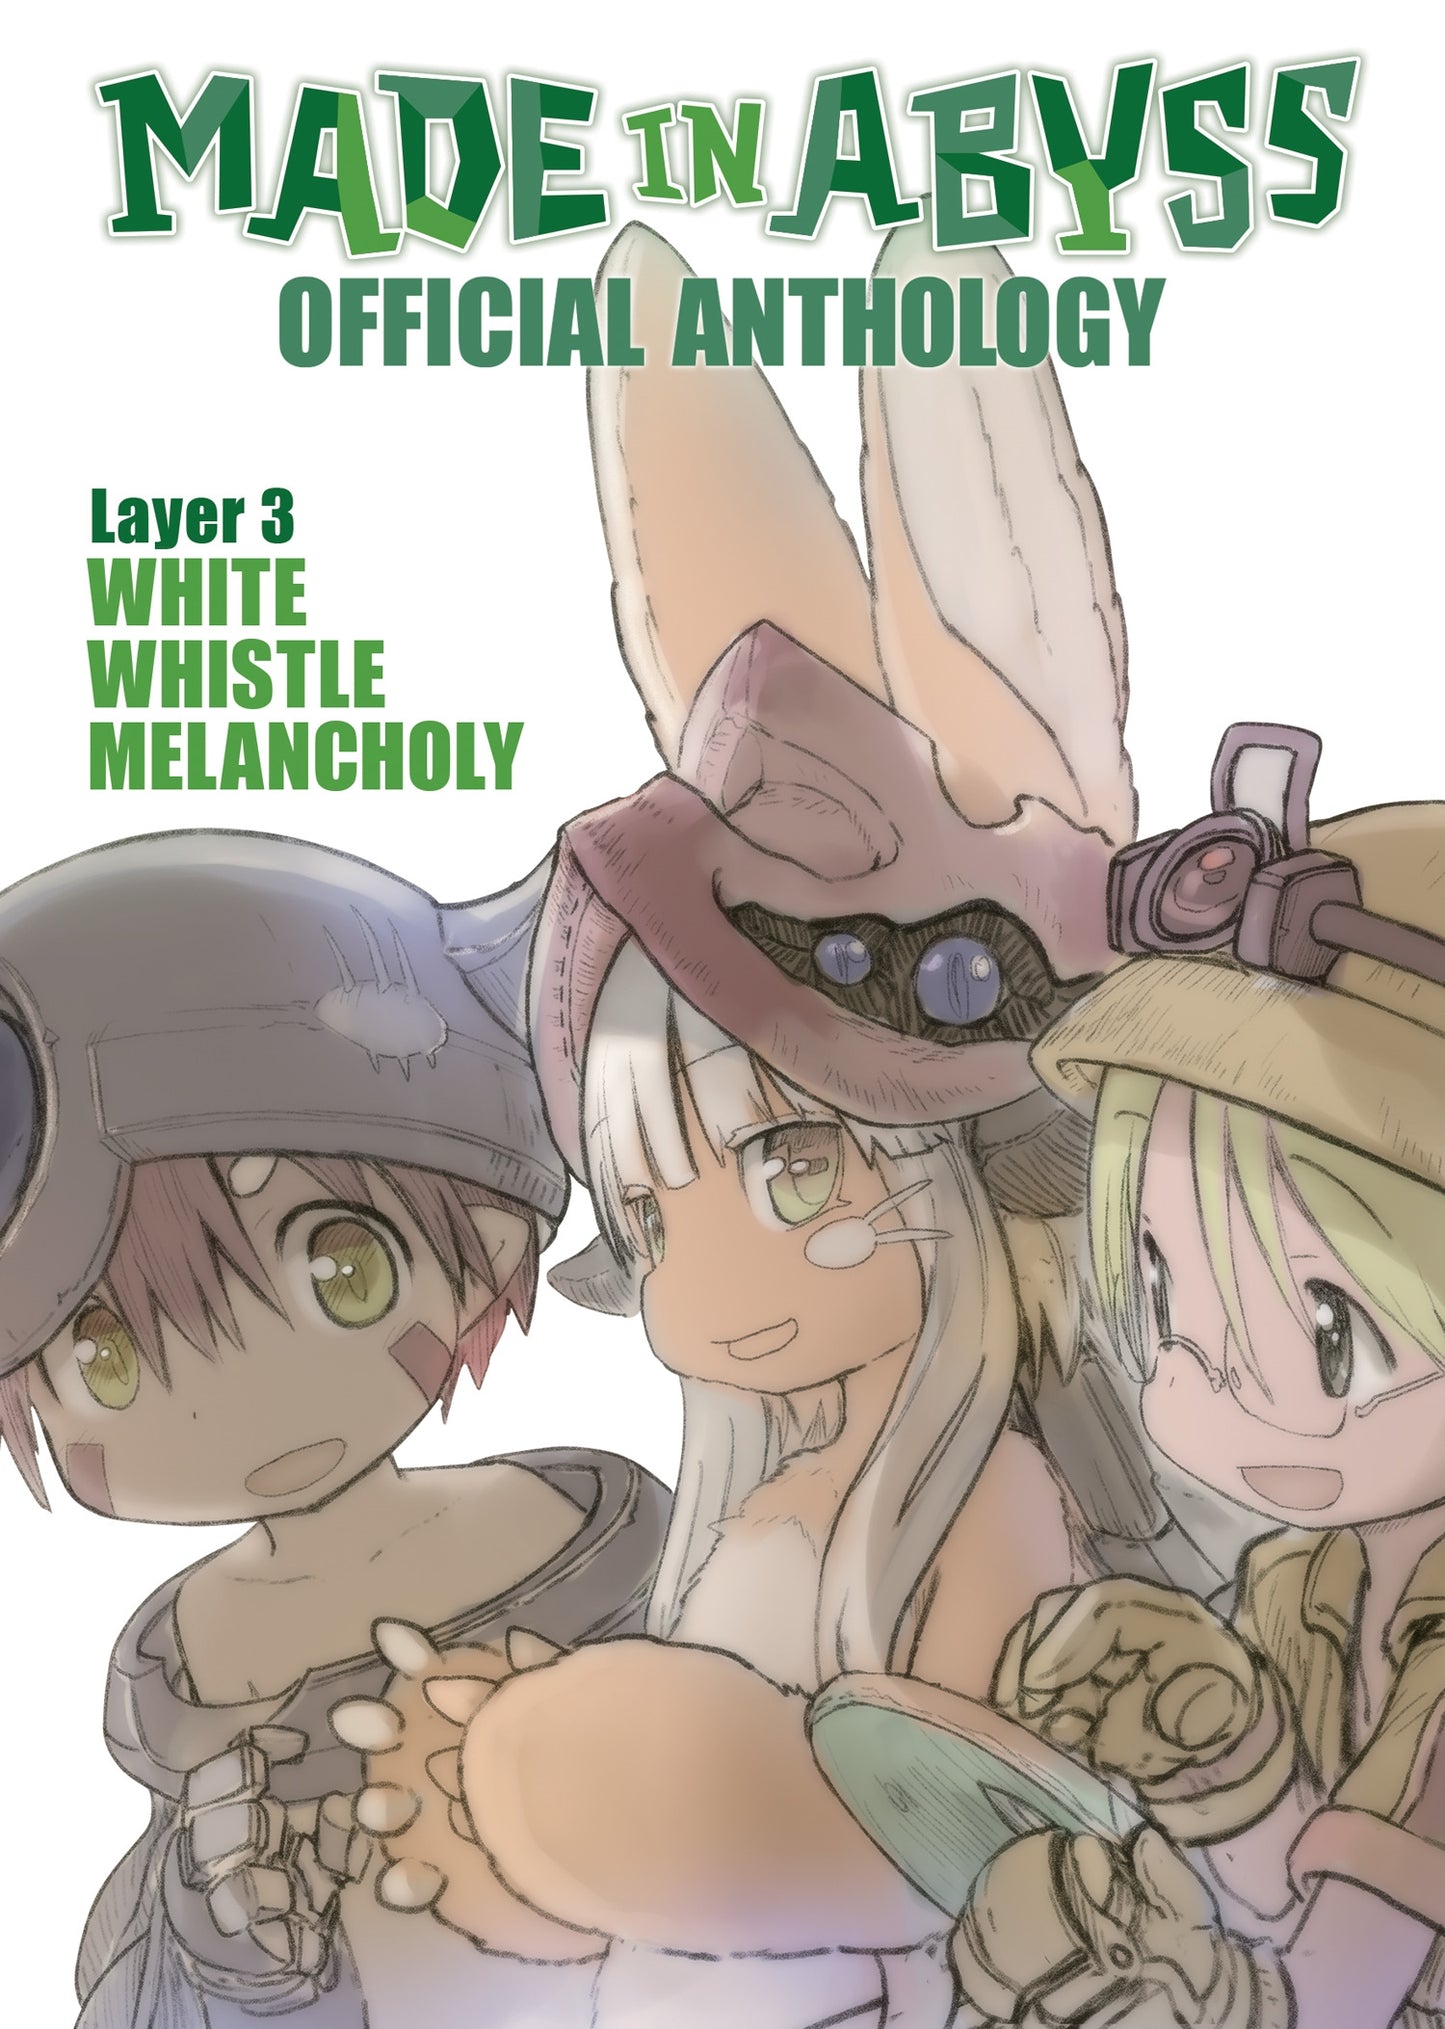 Made in Abyss Official Anthology - Layer 3 : White Whistle Melancholy - Manga Warehouse